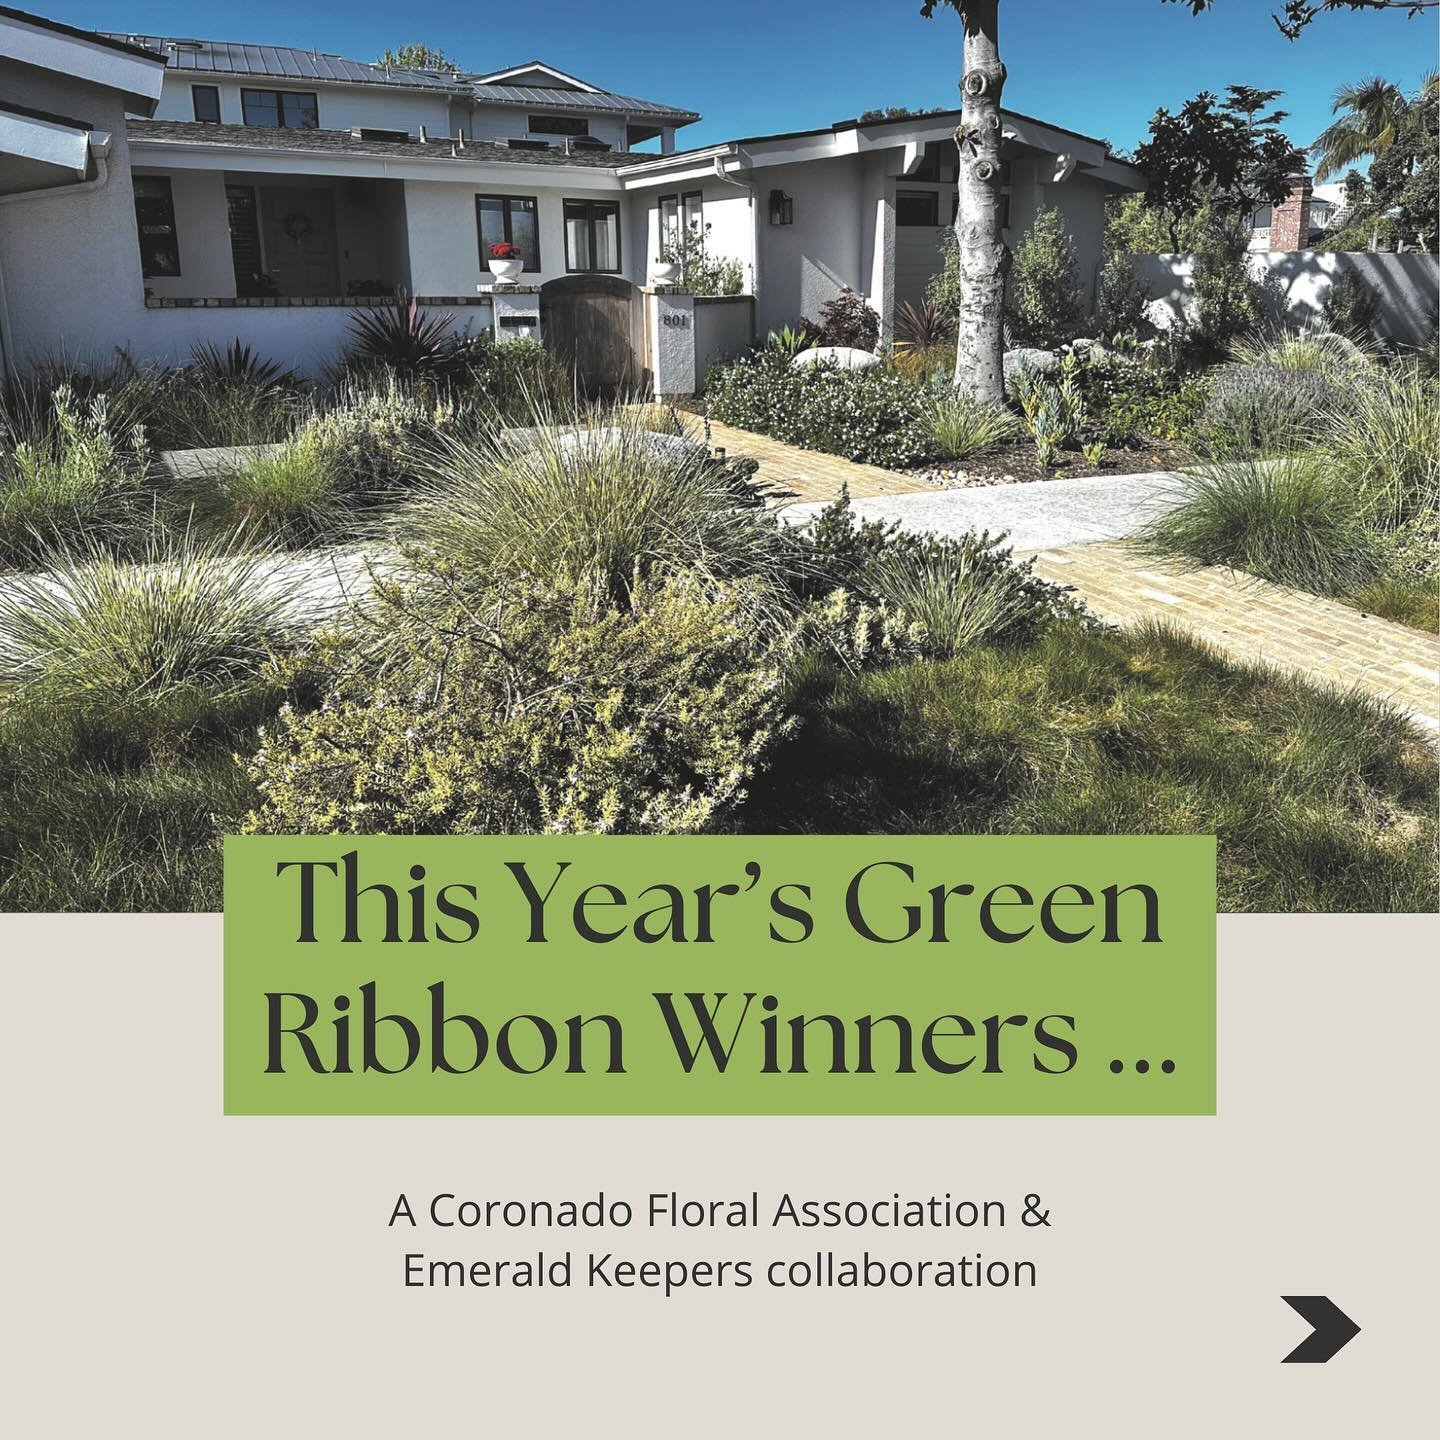 Top eco-friendly landscapes! 🌼🎗️

This year, Emerald Keepers and the Coronado Floral Associafion proudly awarded Earth Friendly Green Ribbons to 318 homes in the Village and Cays. 

These eco-warriors are leading the way with native plants, natural